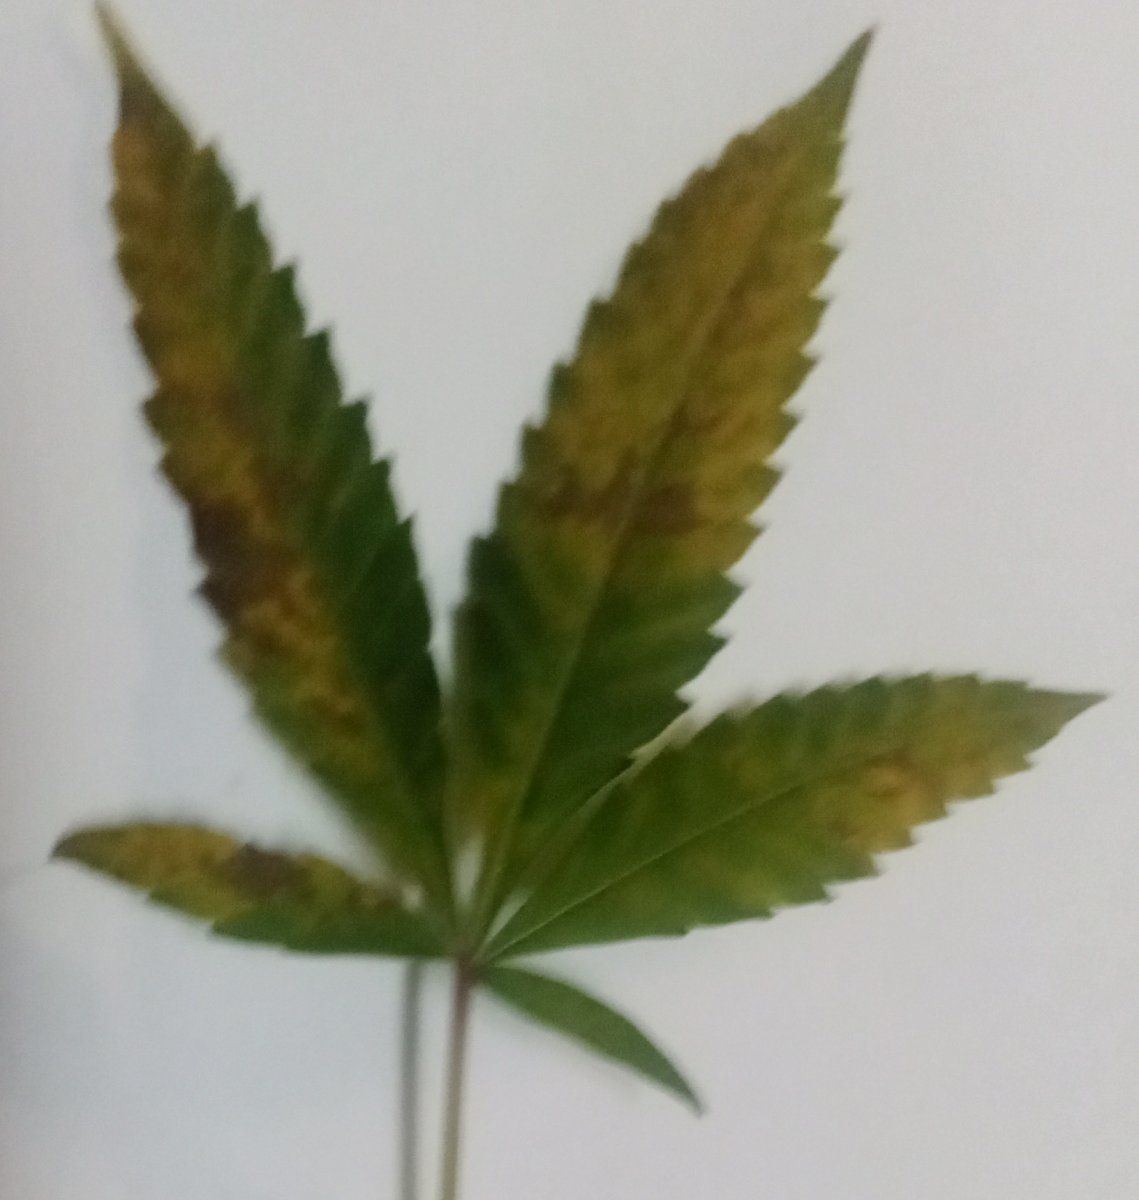 Help  i am finding leaves with spots and brown blotches   what did i do wrong 2